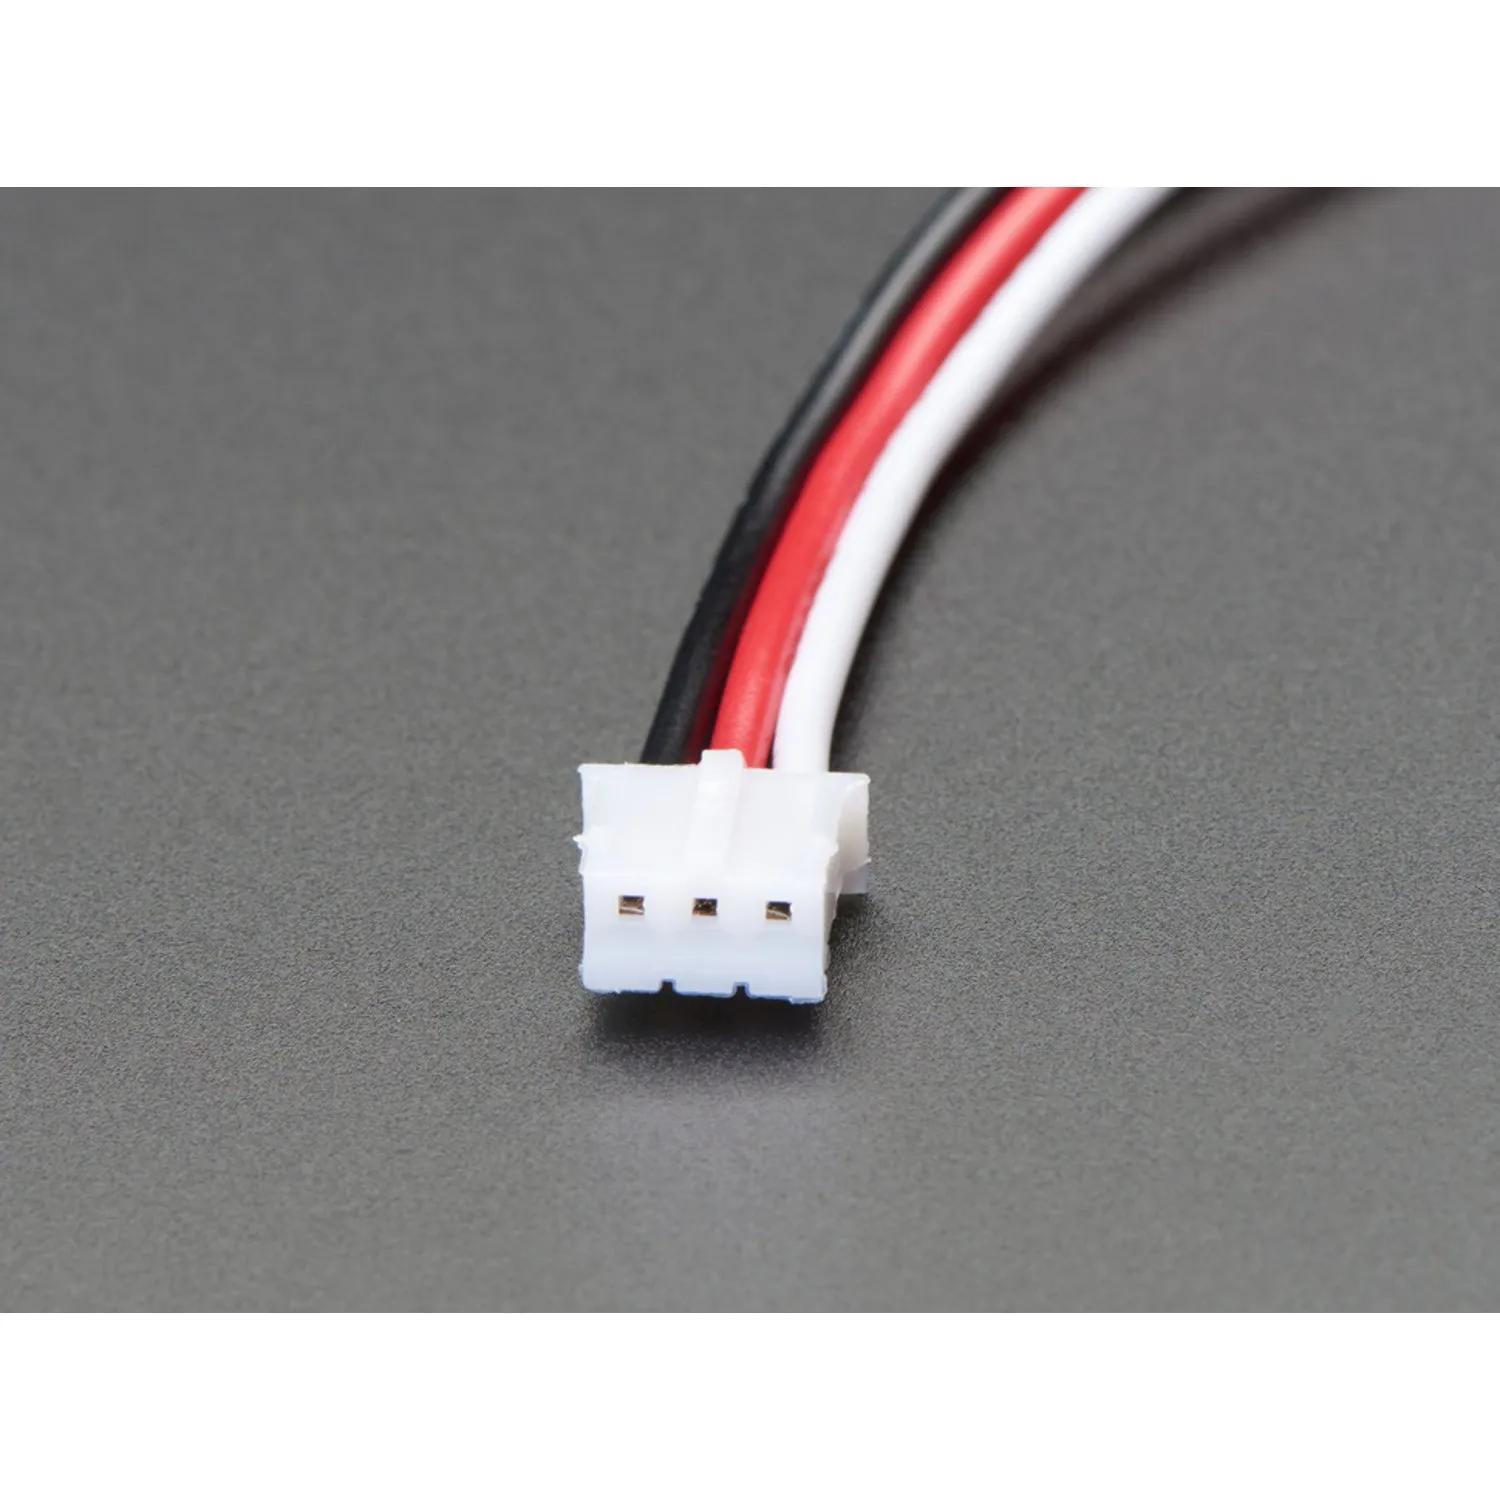 Photo of JST PH 3-Pin to Female Socket Cable - 200mm